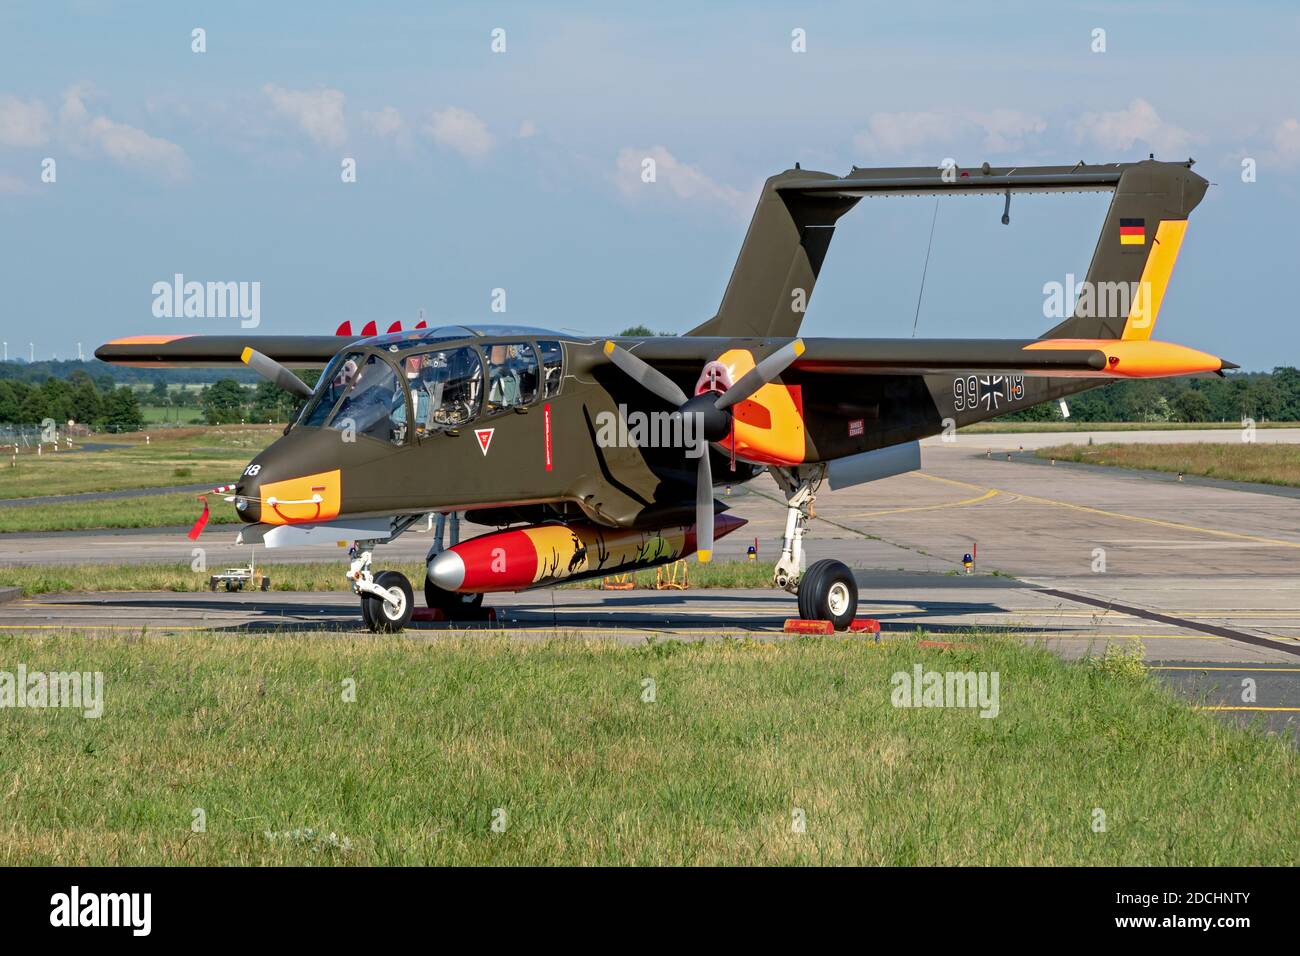 Former German Air Force North American Rockwell OV-10 Bronco observation plane at Nordholz airbase. Germany - June 14, 2019 Stock Photo